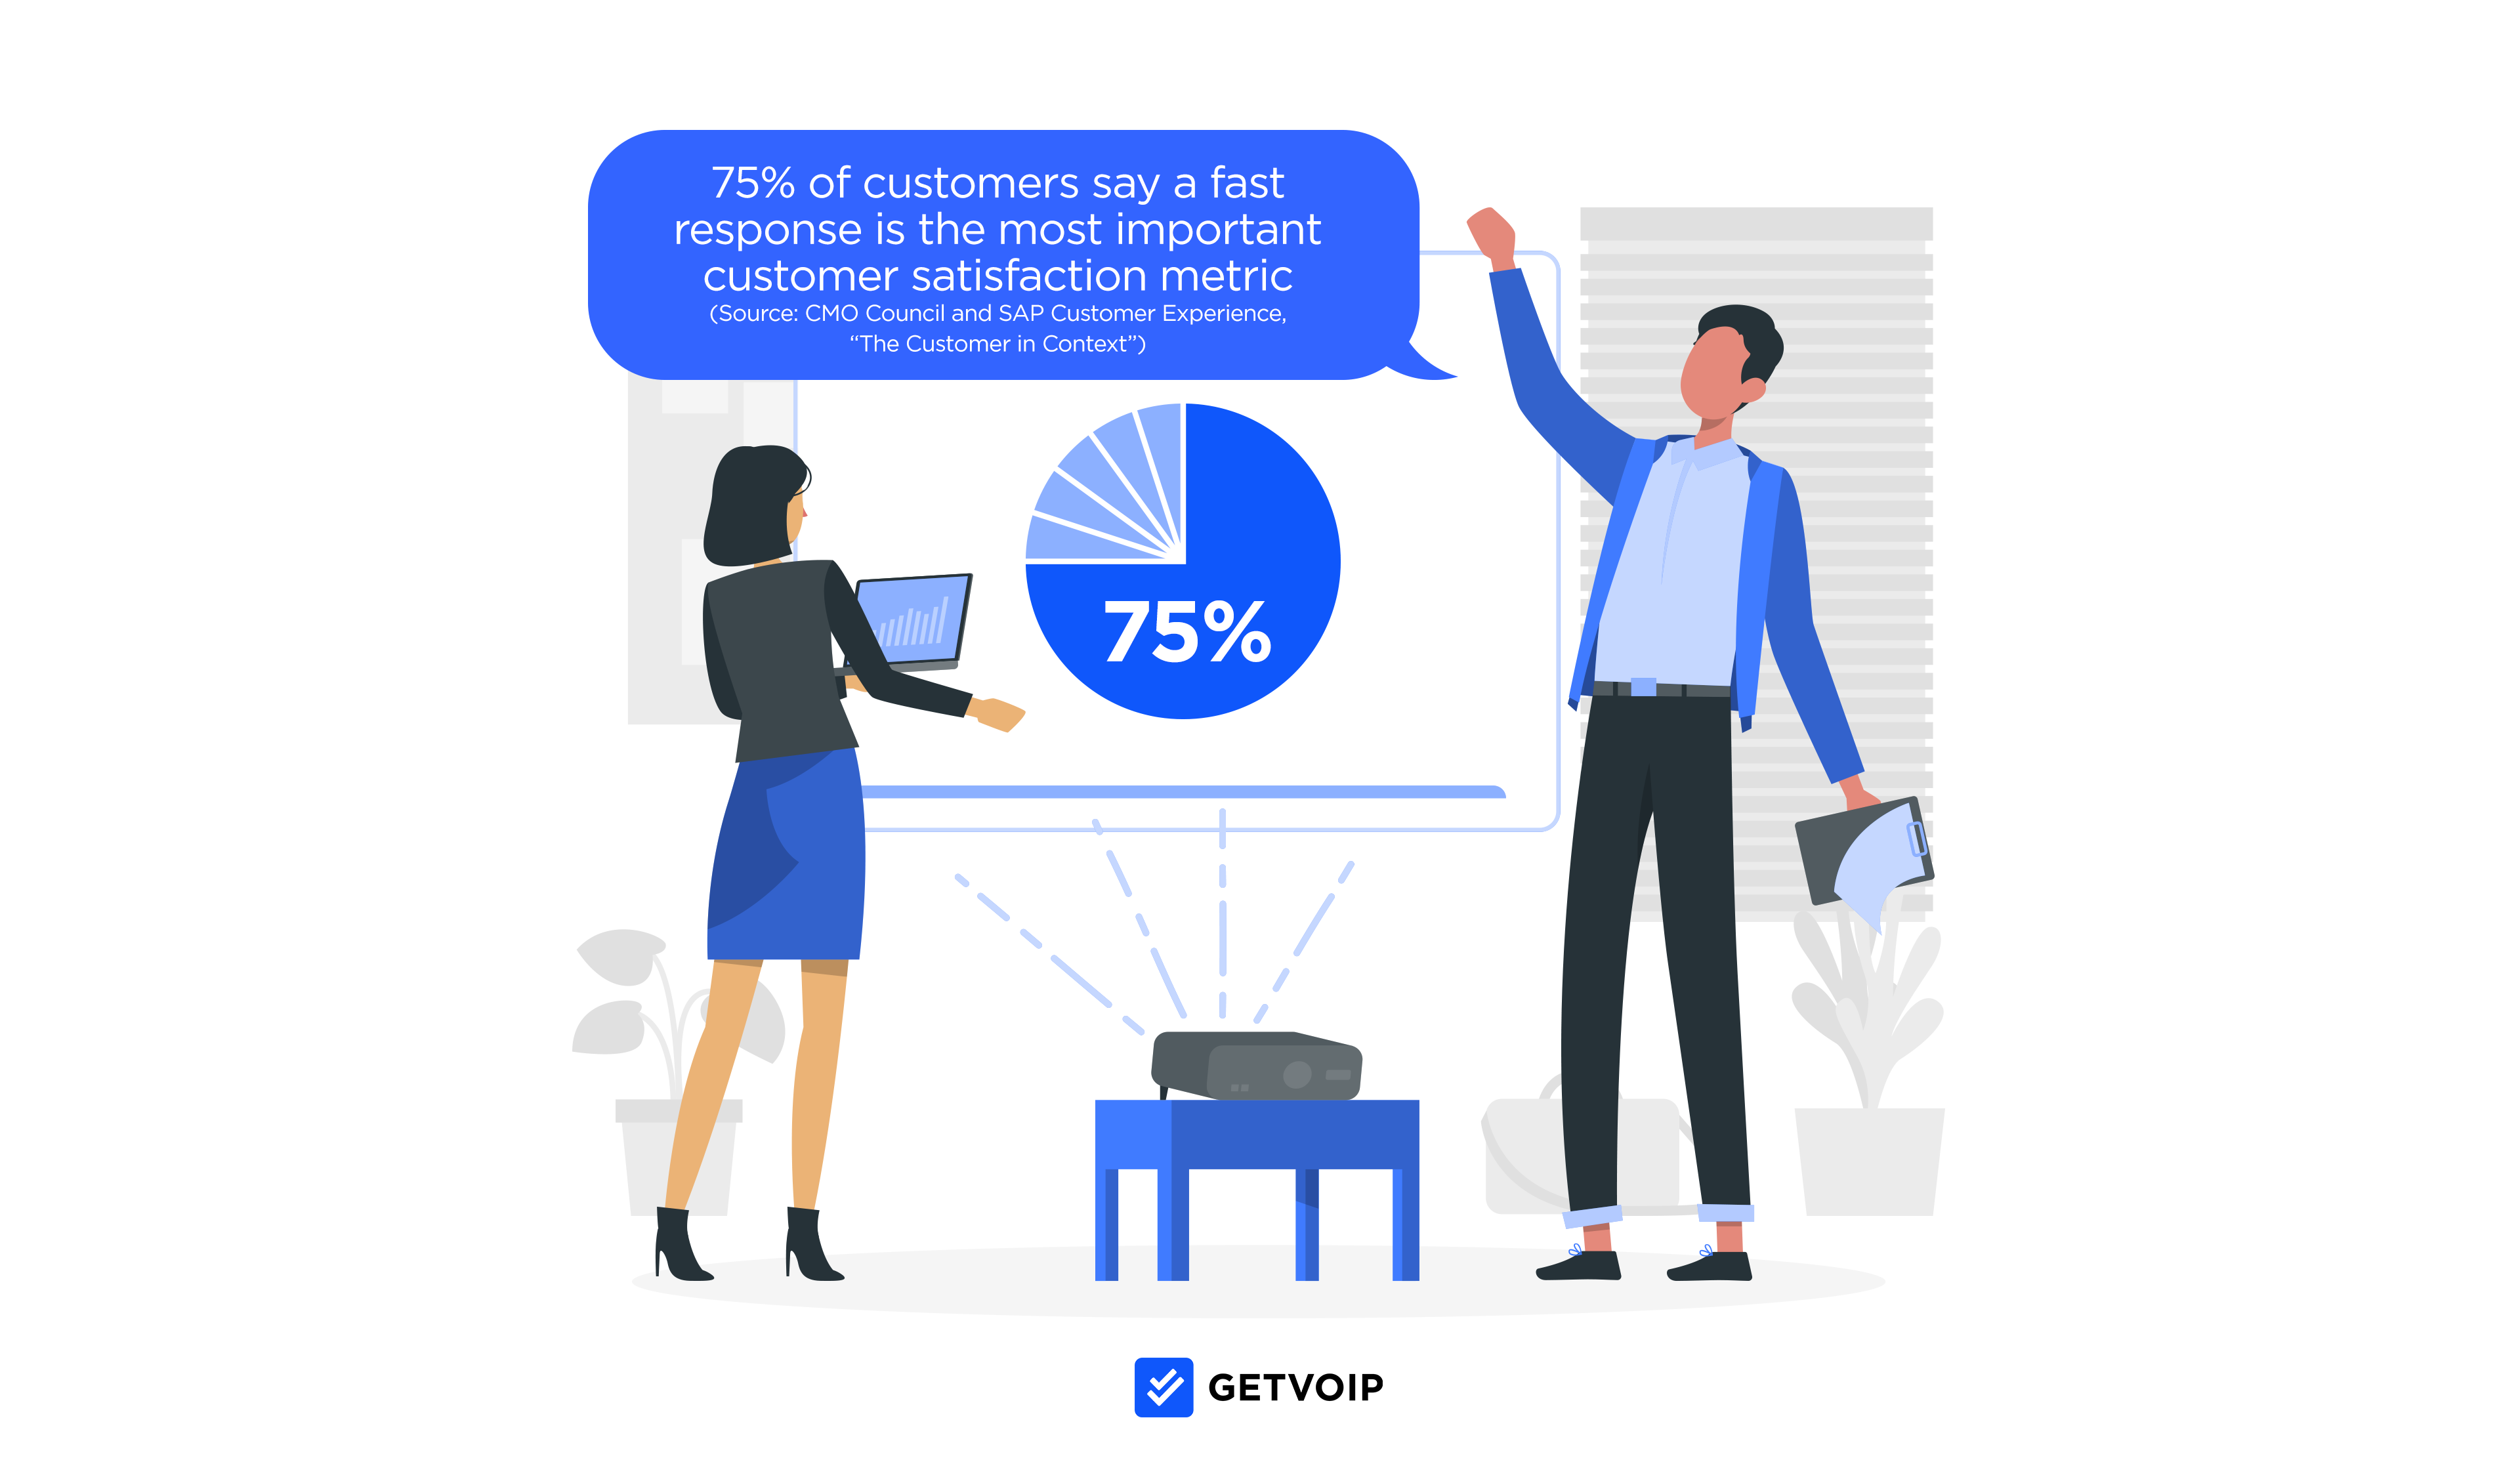 75% of customers say a fast response is the most important customer satisfaction metric